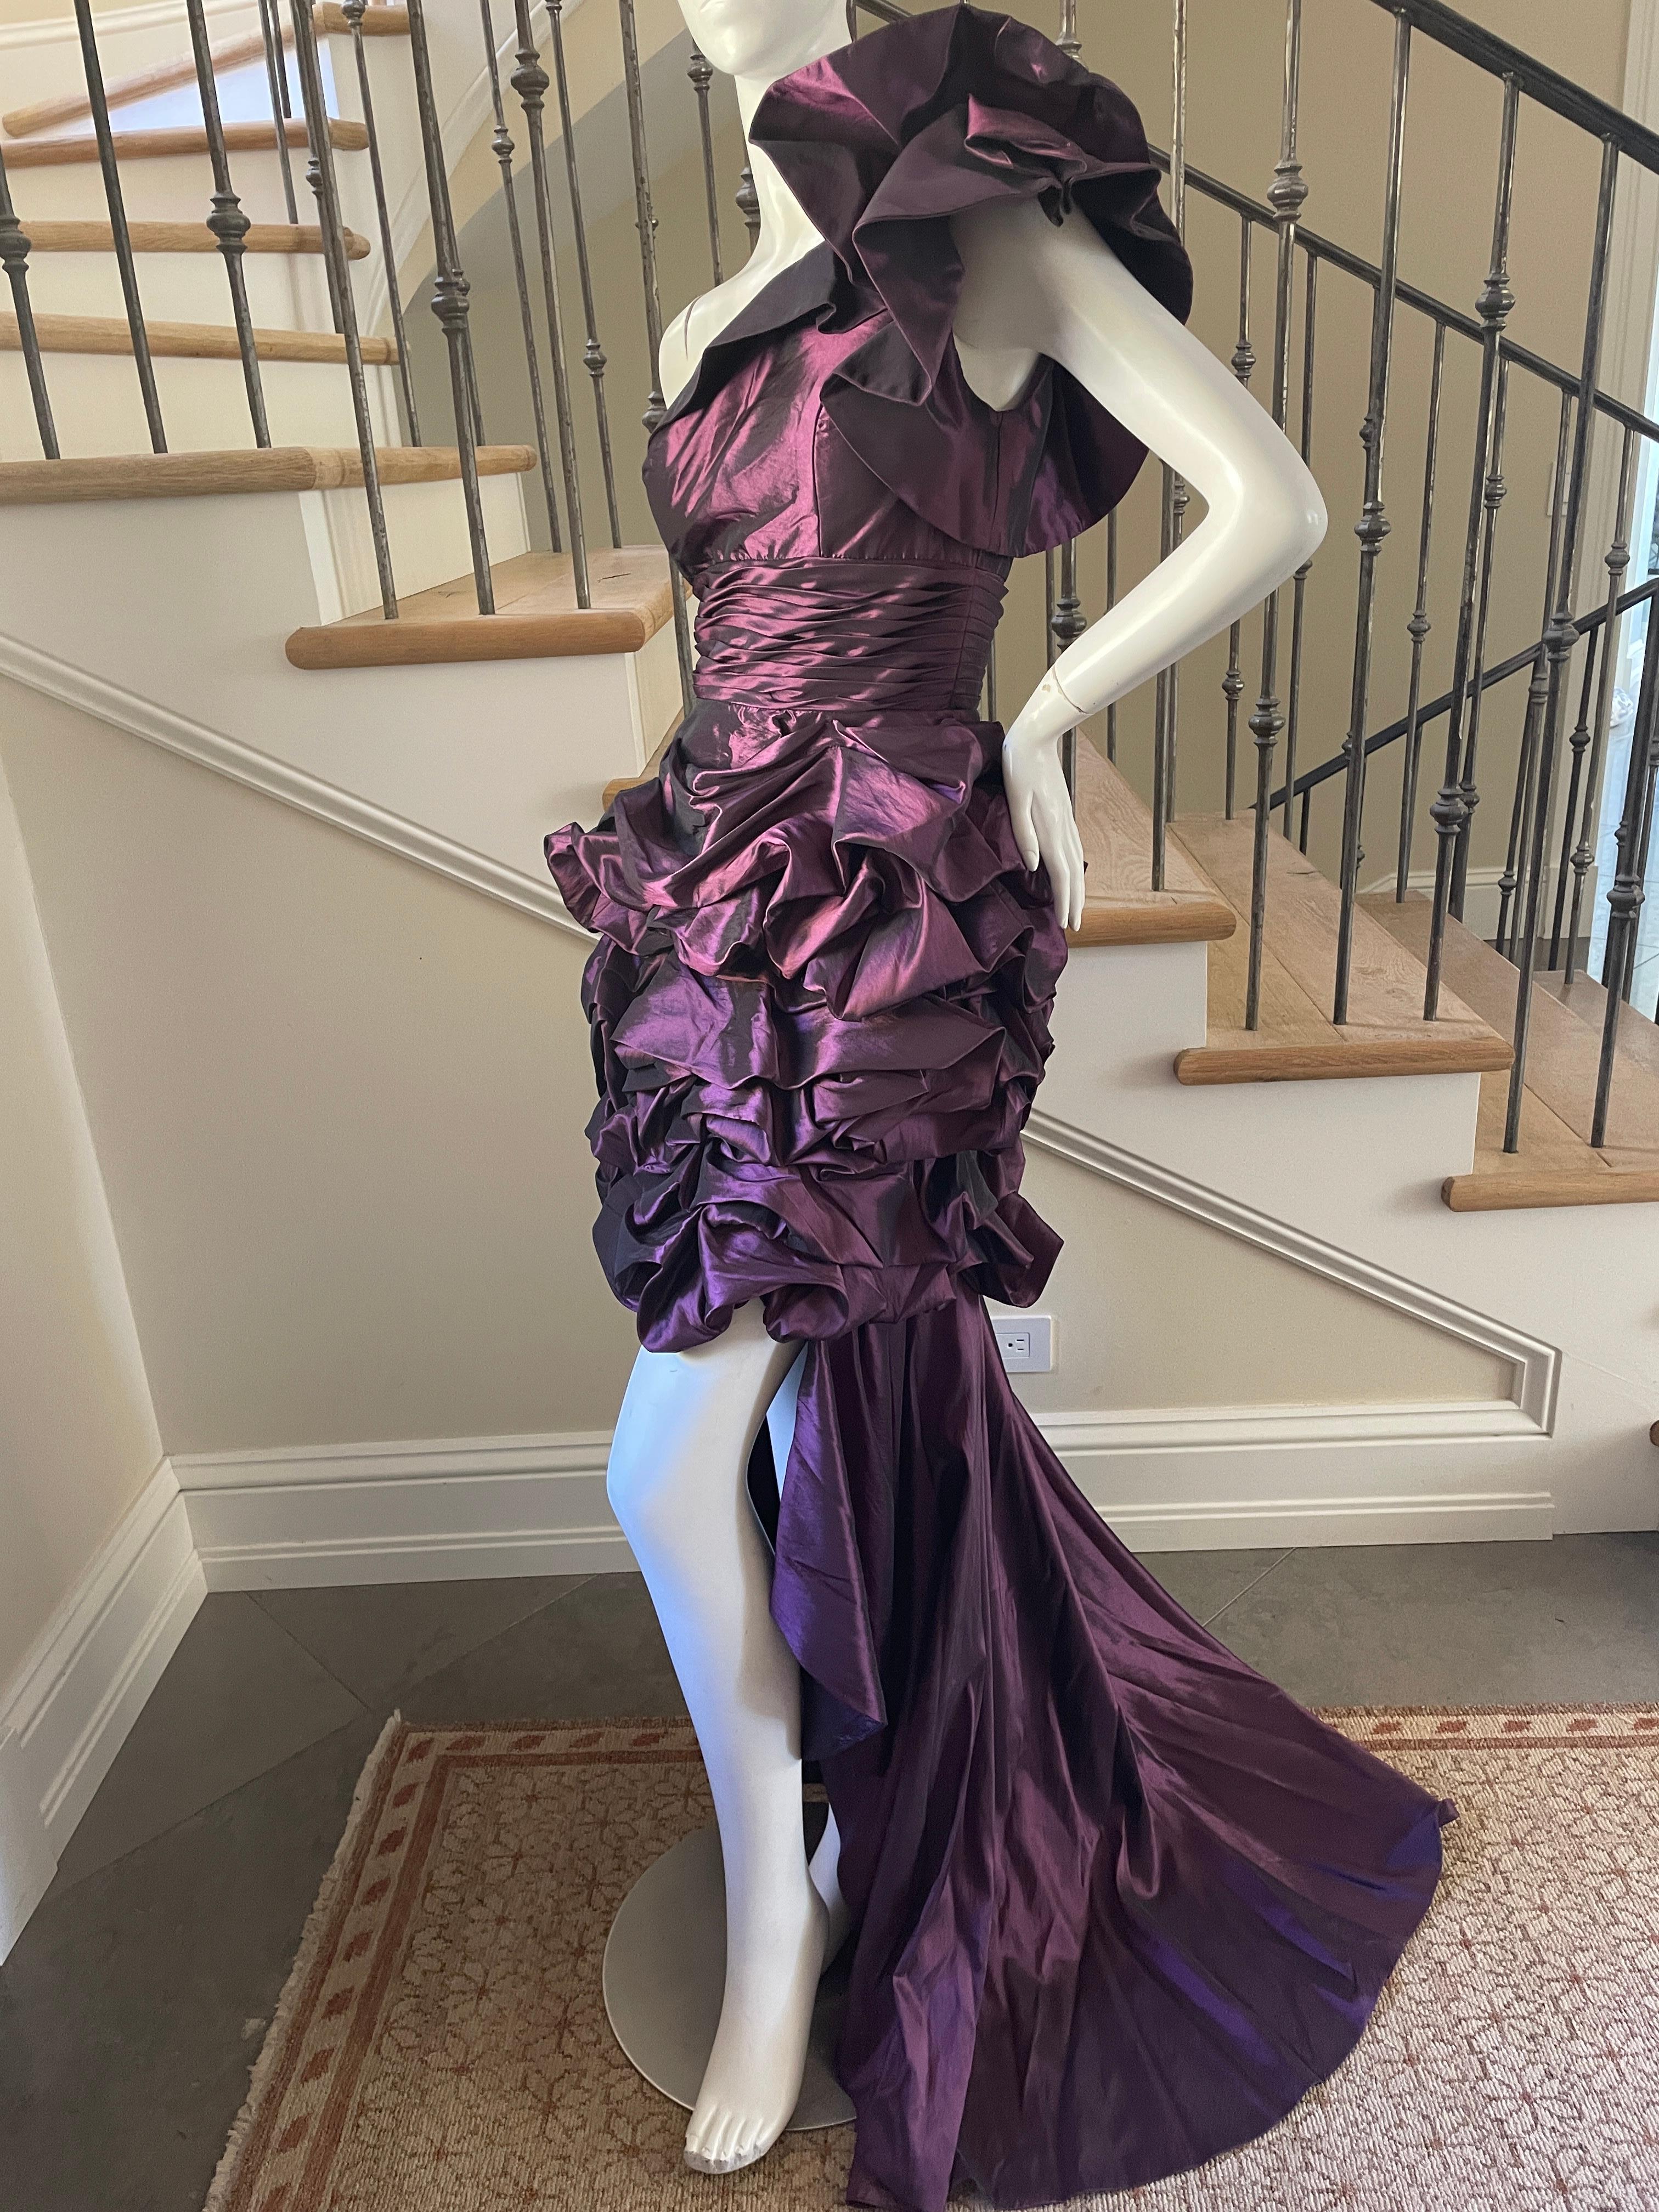 Pierre Cardin Vintage 80's Purple One Shoulder Evening Dress with Detachable Train.
This is so fun, the train zips off.
 This is so pretty, looks better on live model.
Size 42
 Bust 35